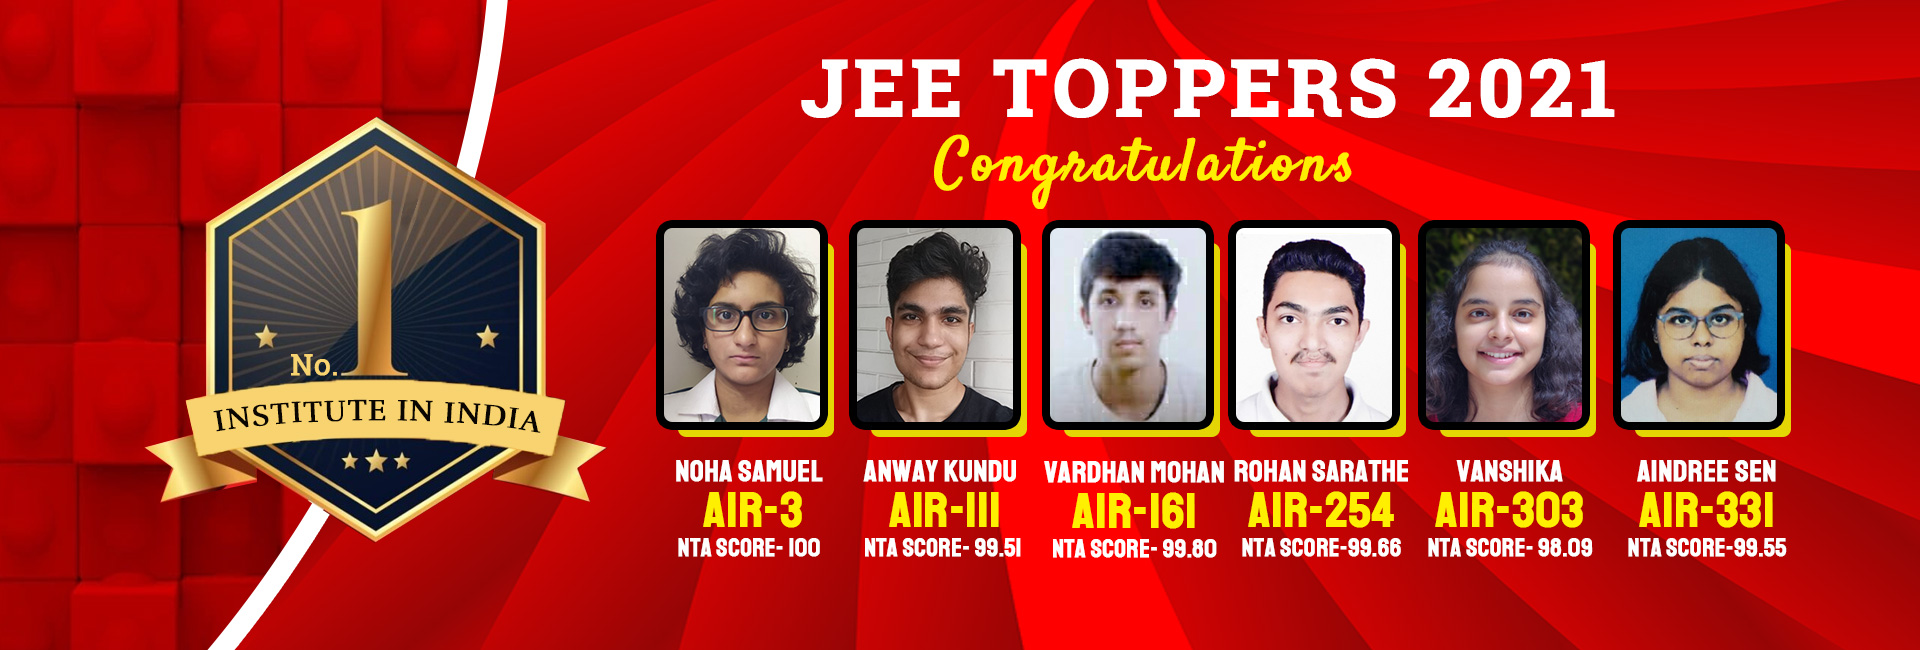 jee 2021 top students